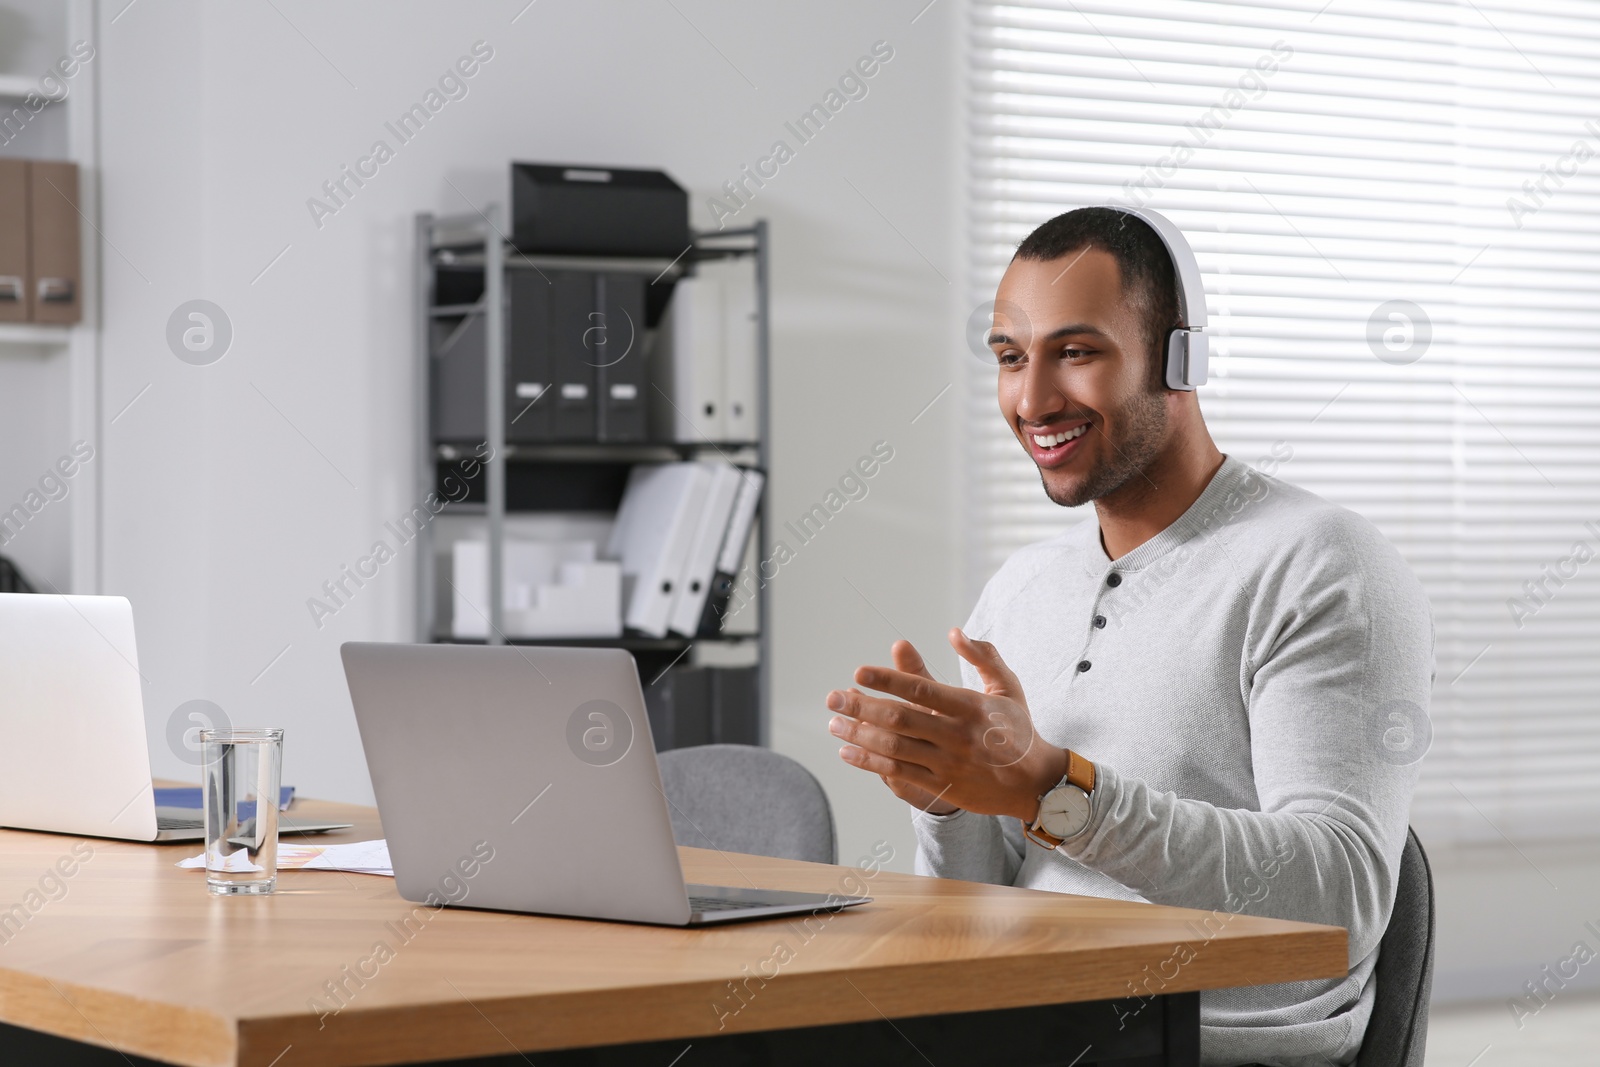 Photo of Young man with headphones having video chat via laptop at table in office